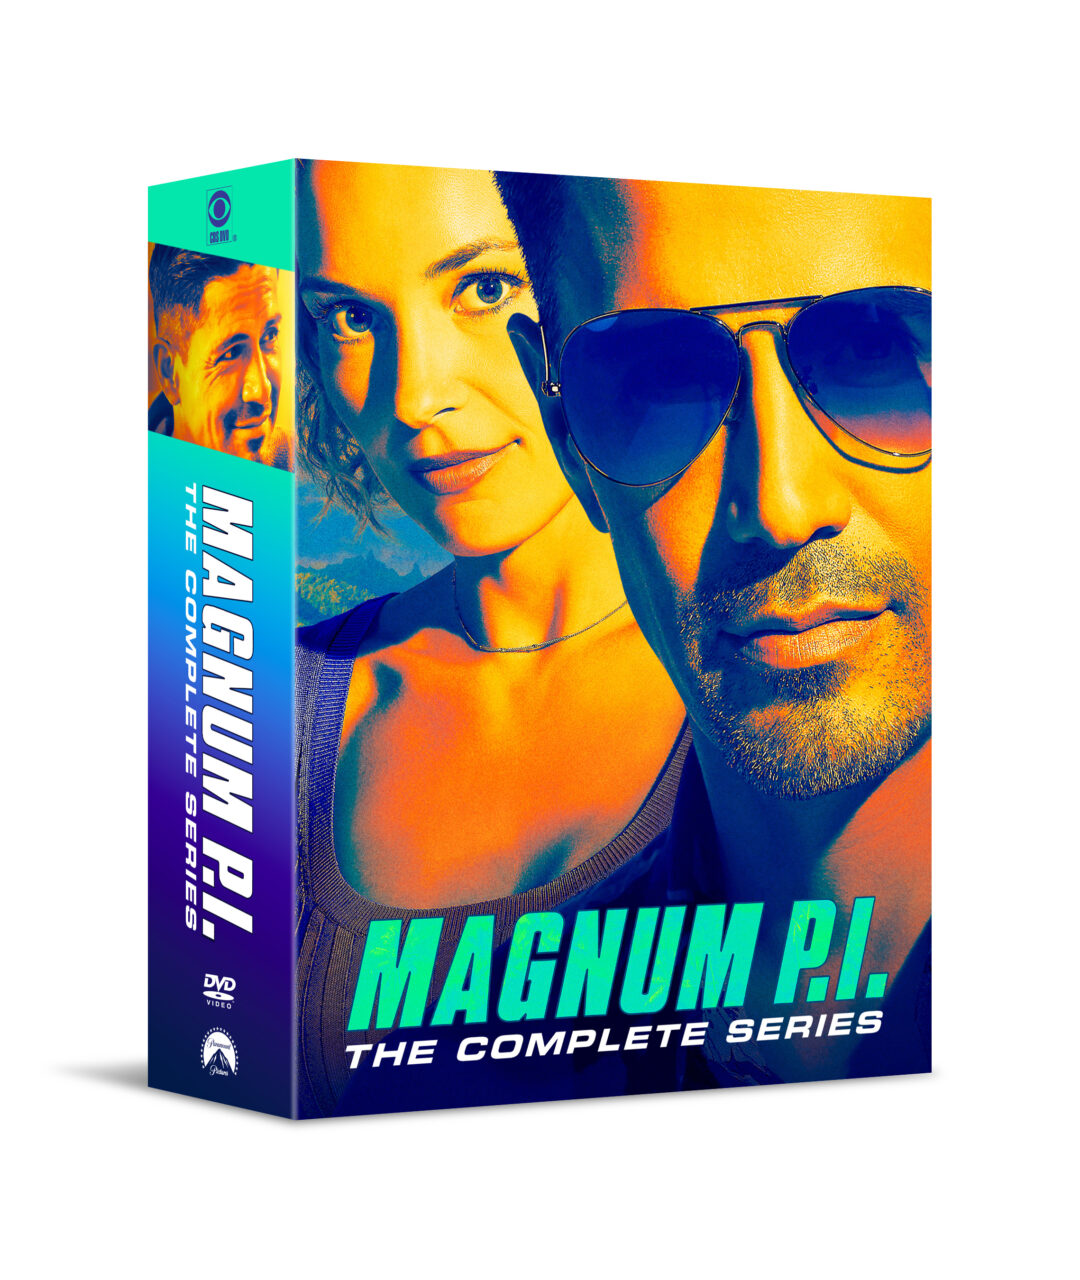 Magnum P.I.: The Complete Series DVD cover (Paramount Home Entertainment)